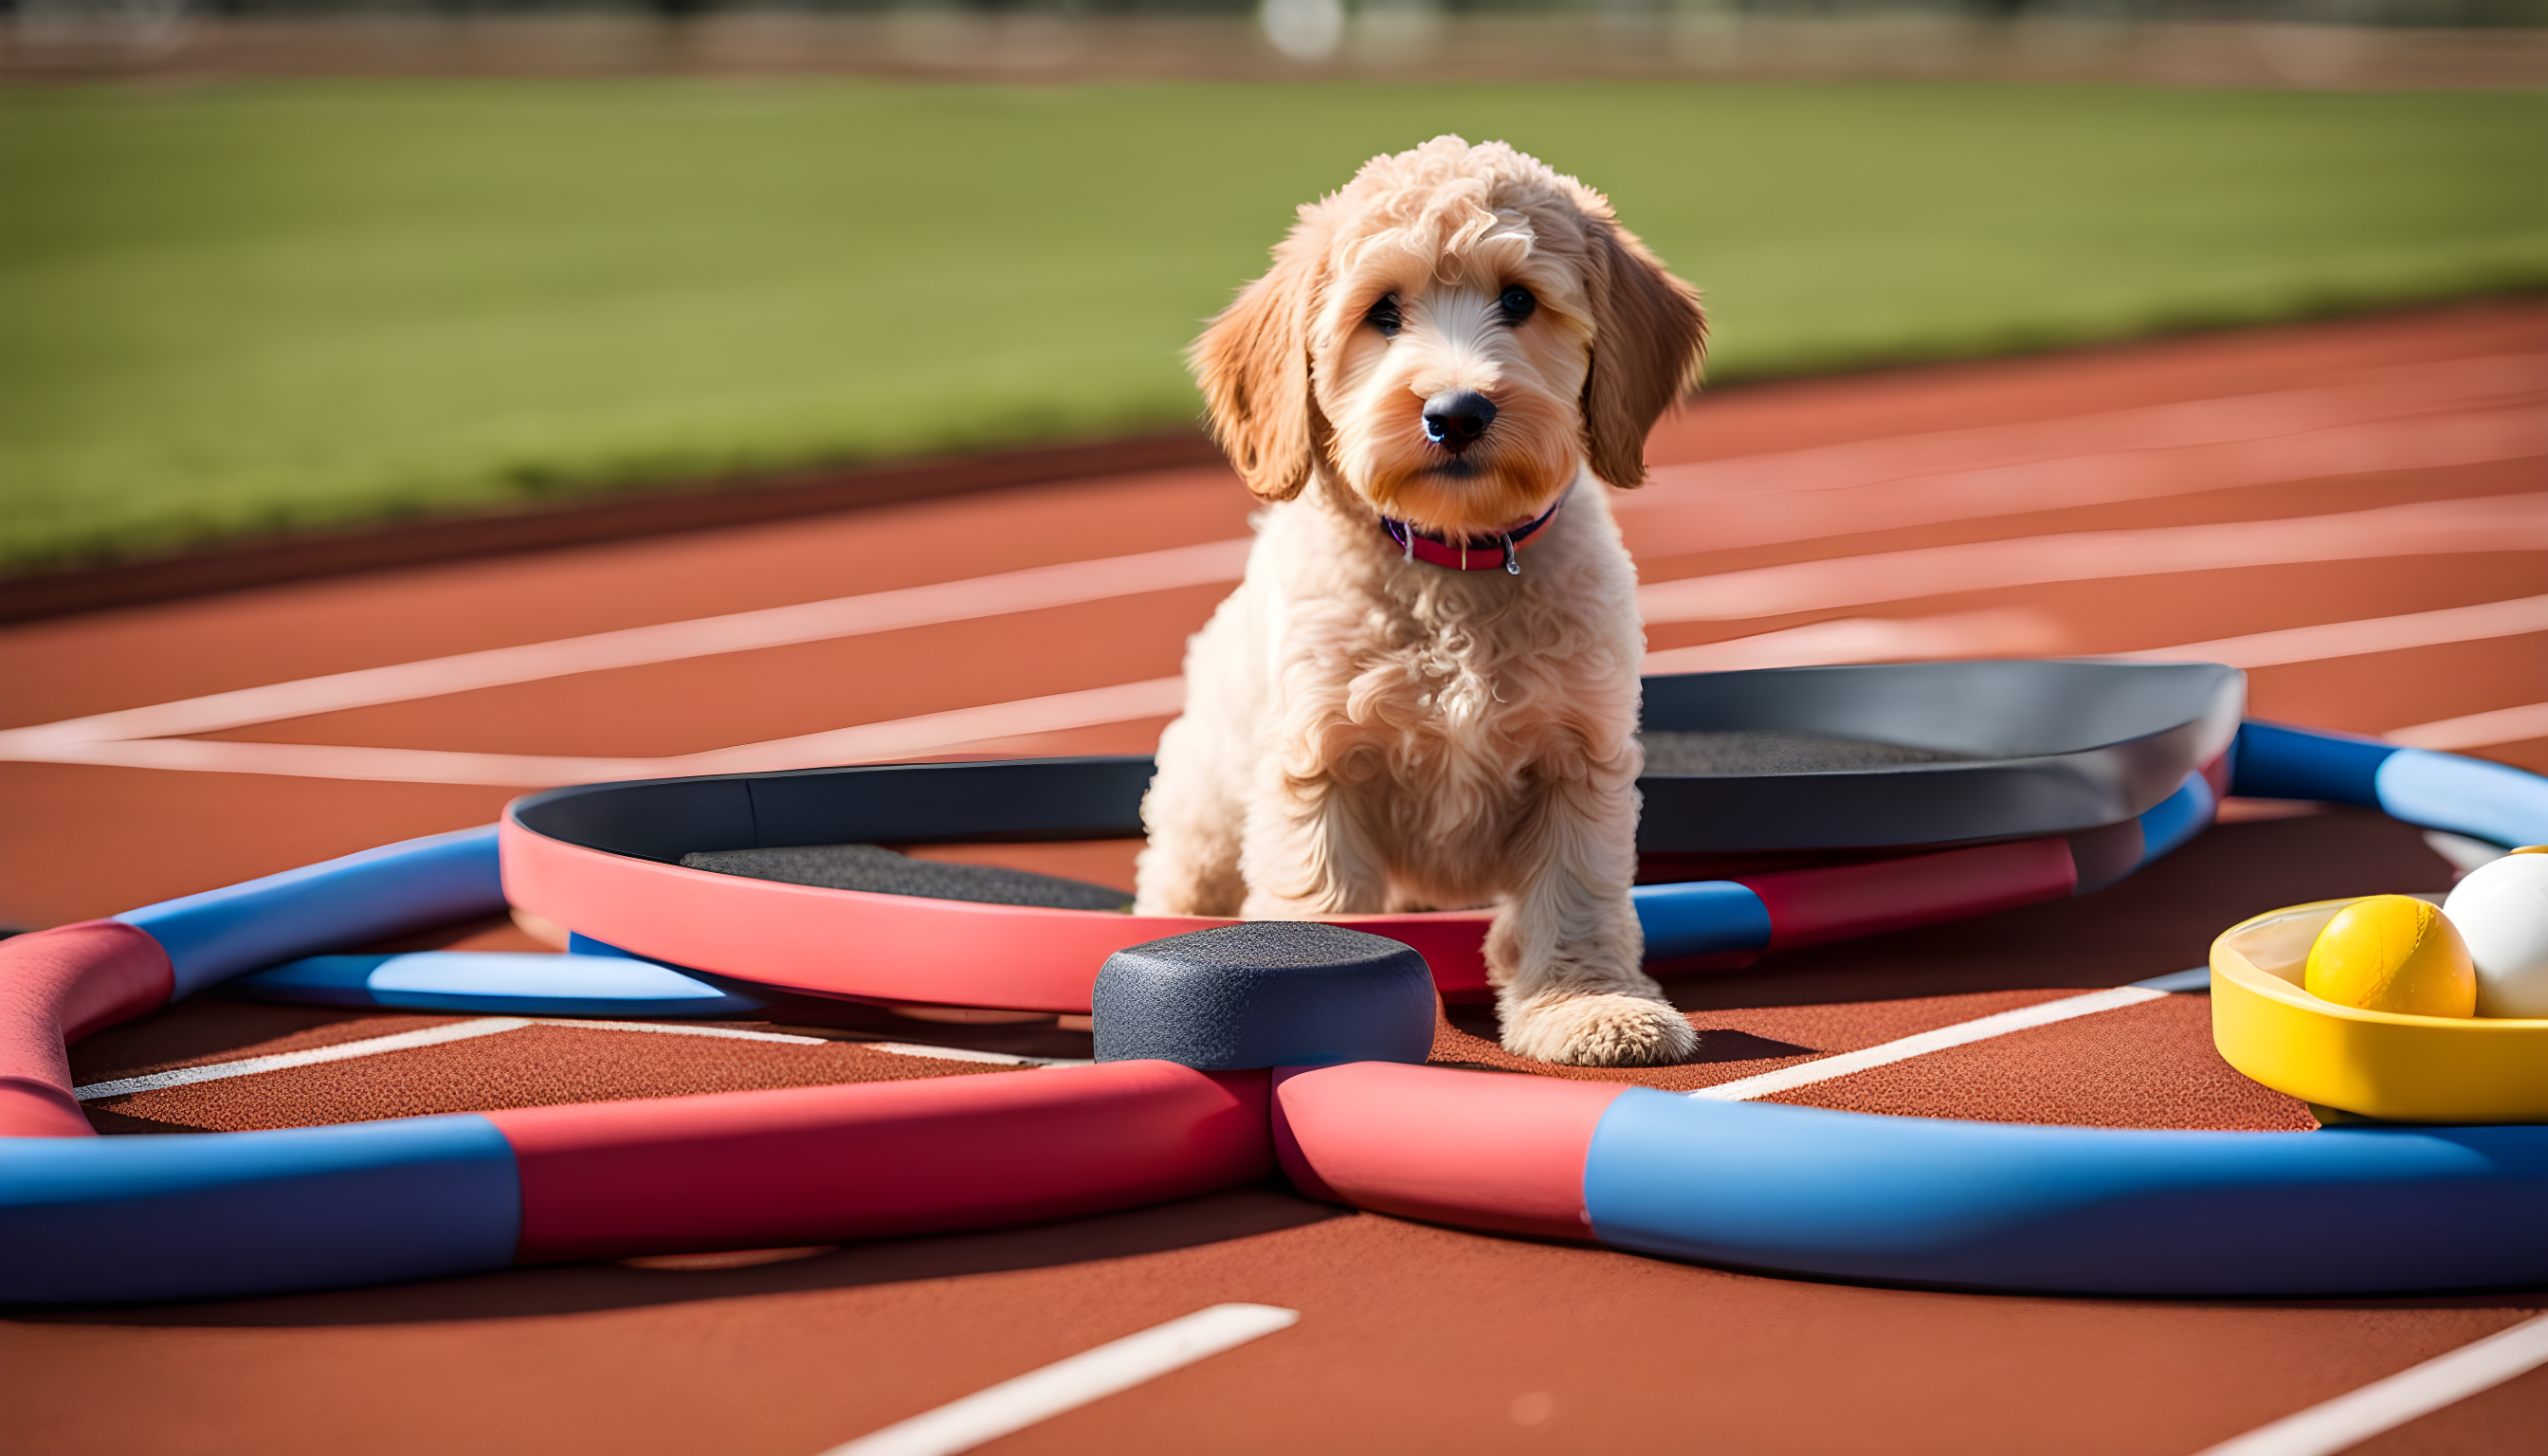 A Labradoodle pup standing next to a DNA helix, a food bowl, and a running track.